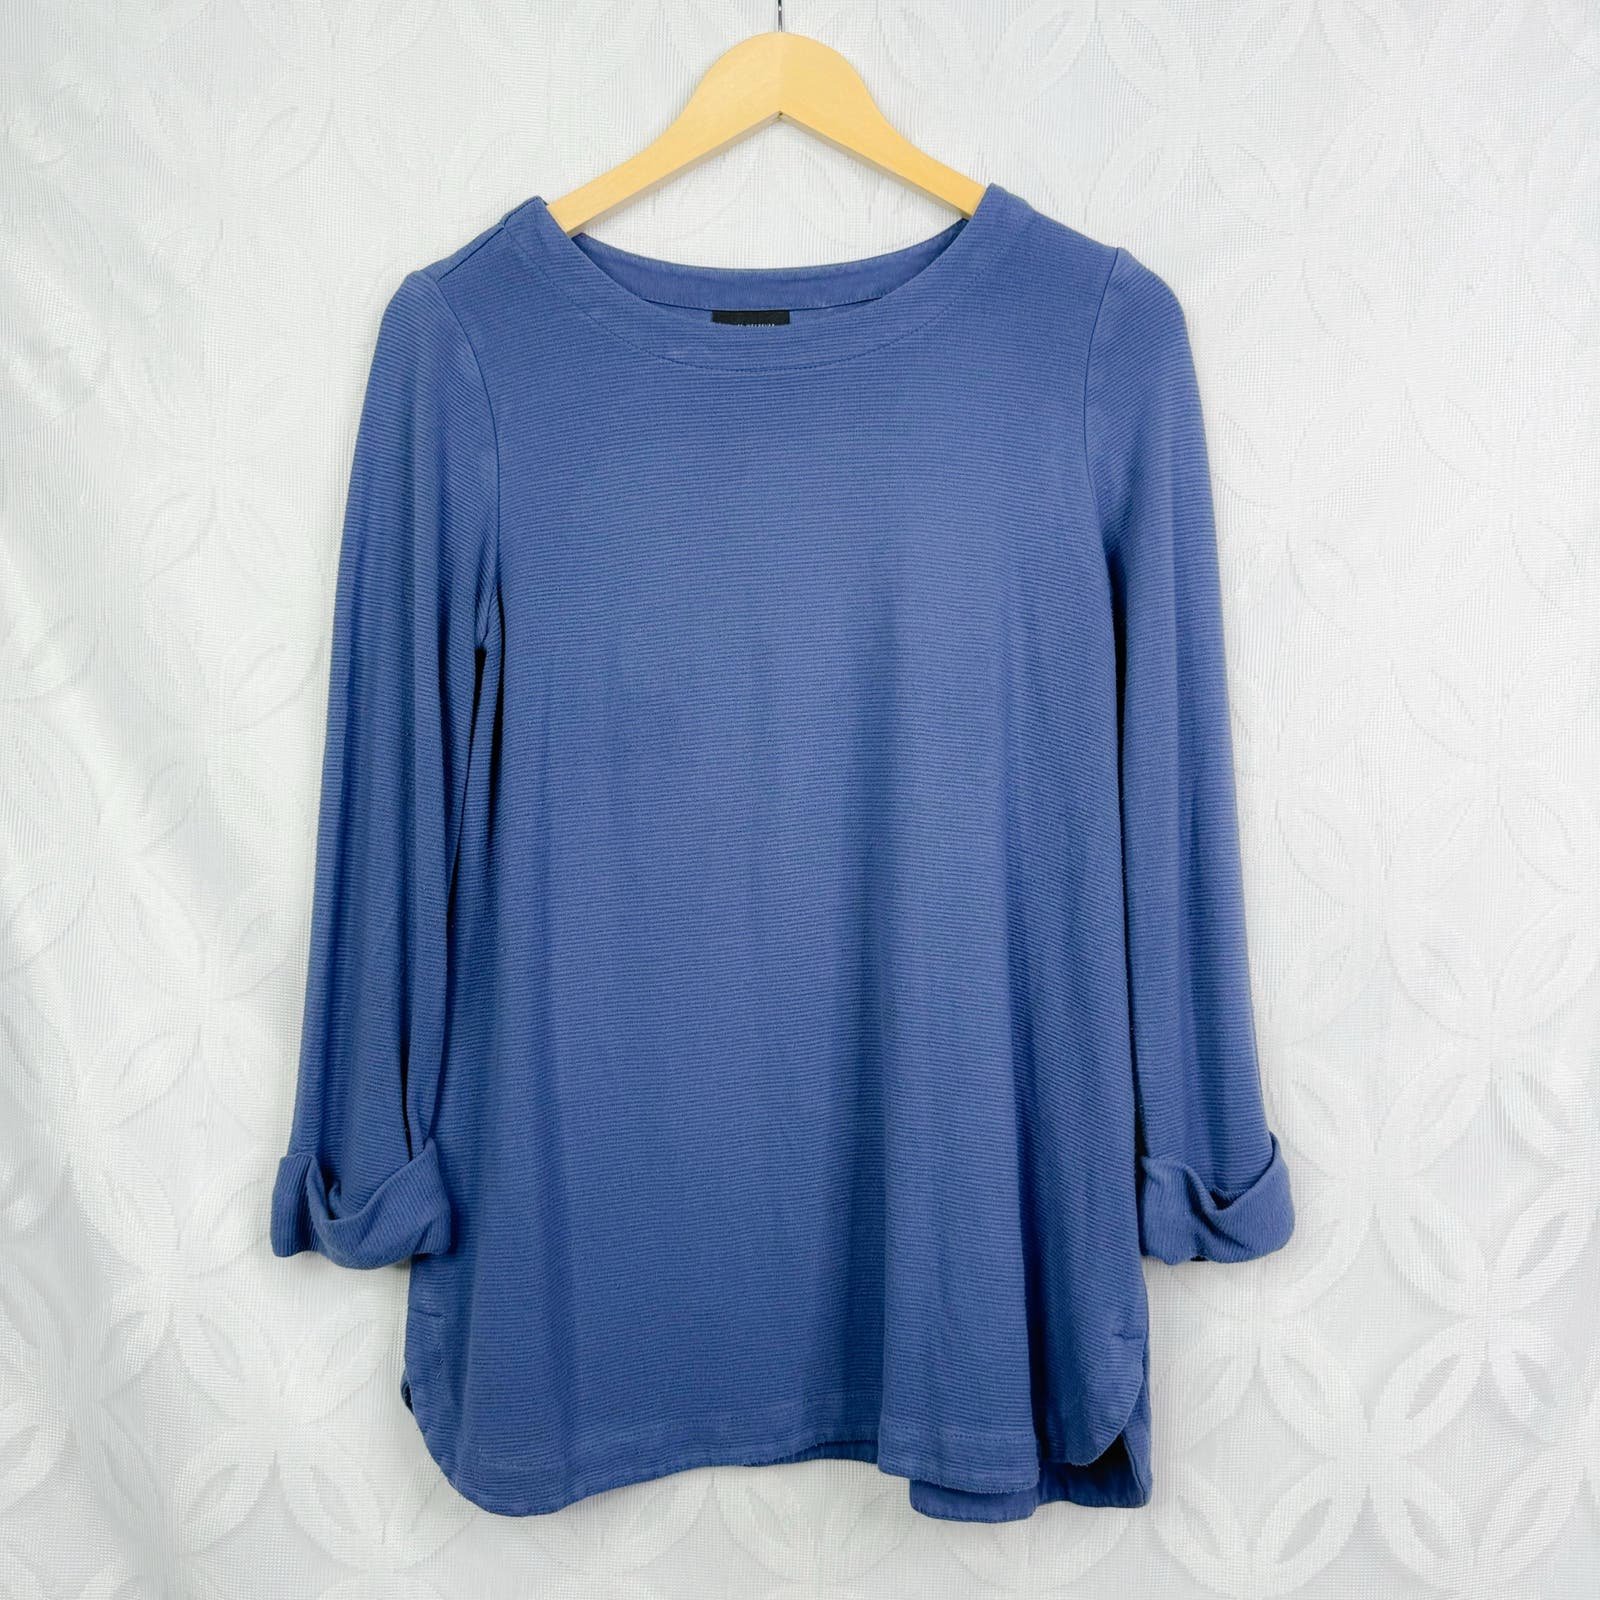 J. Jill Wearever Collection Blue Ribbed Boat Neck Cuffed 3/4 Sleeve Top XS dMdU8hb4K